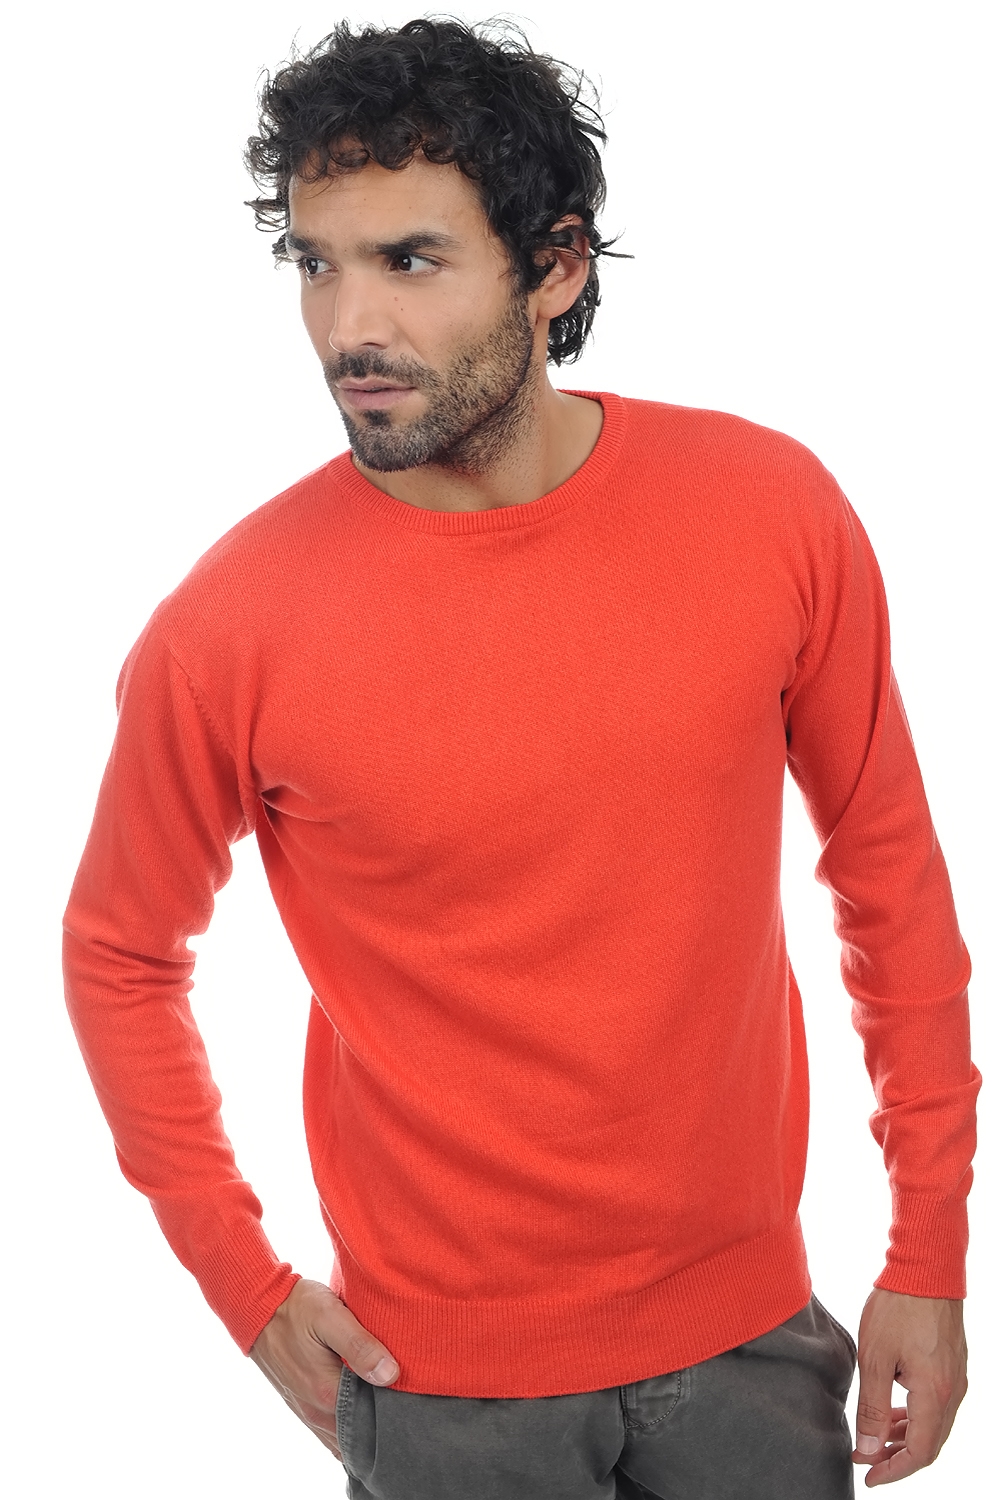 Cachemire pull homme keaton corail lumineux s